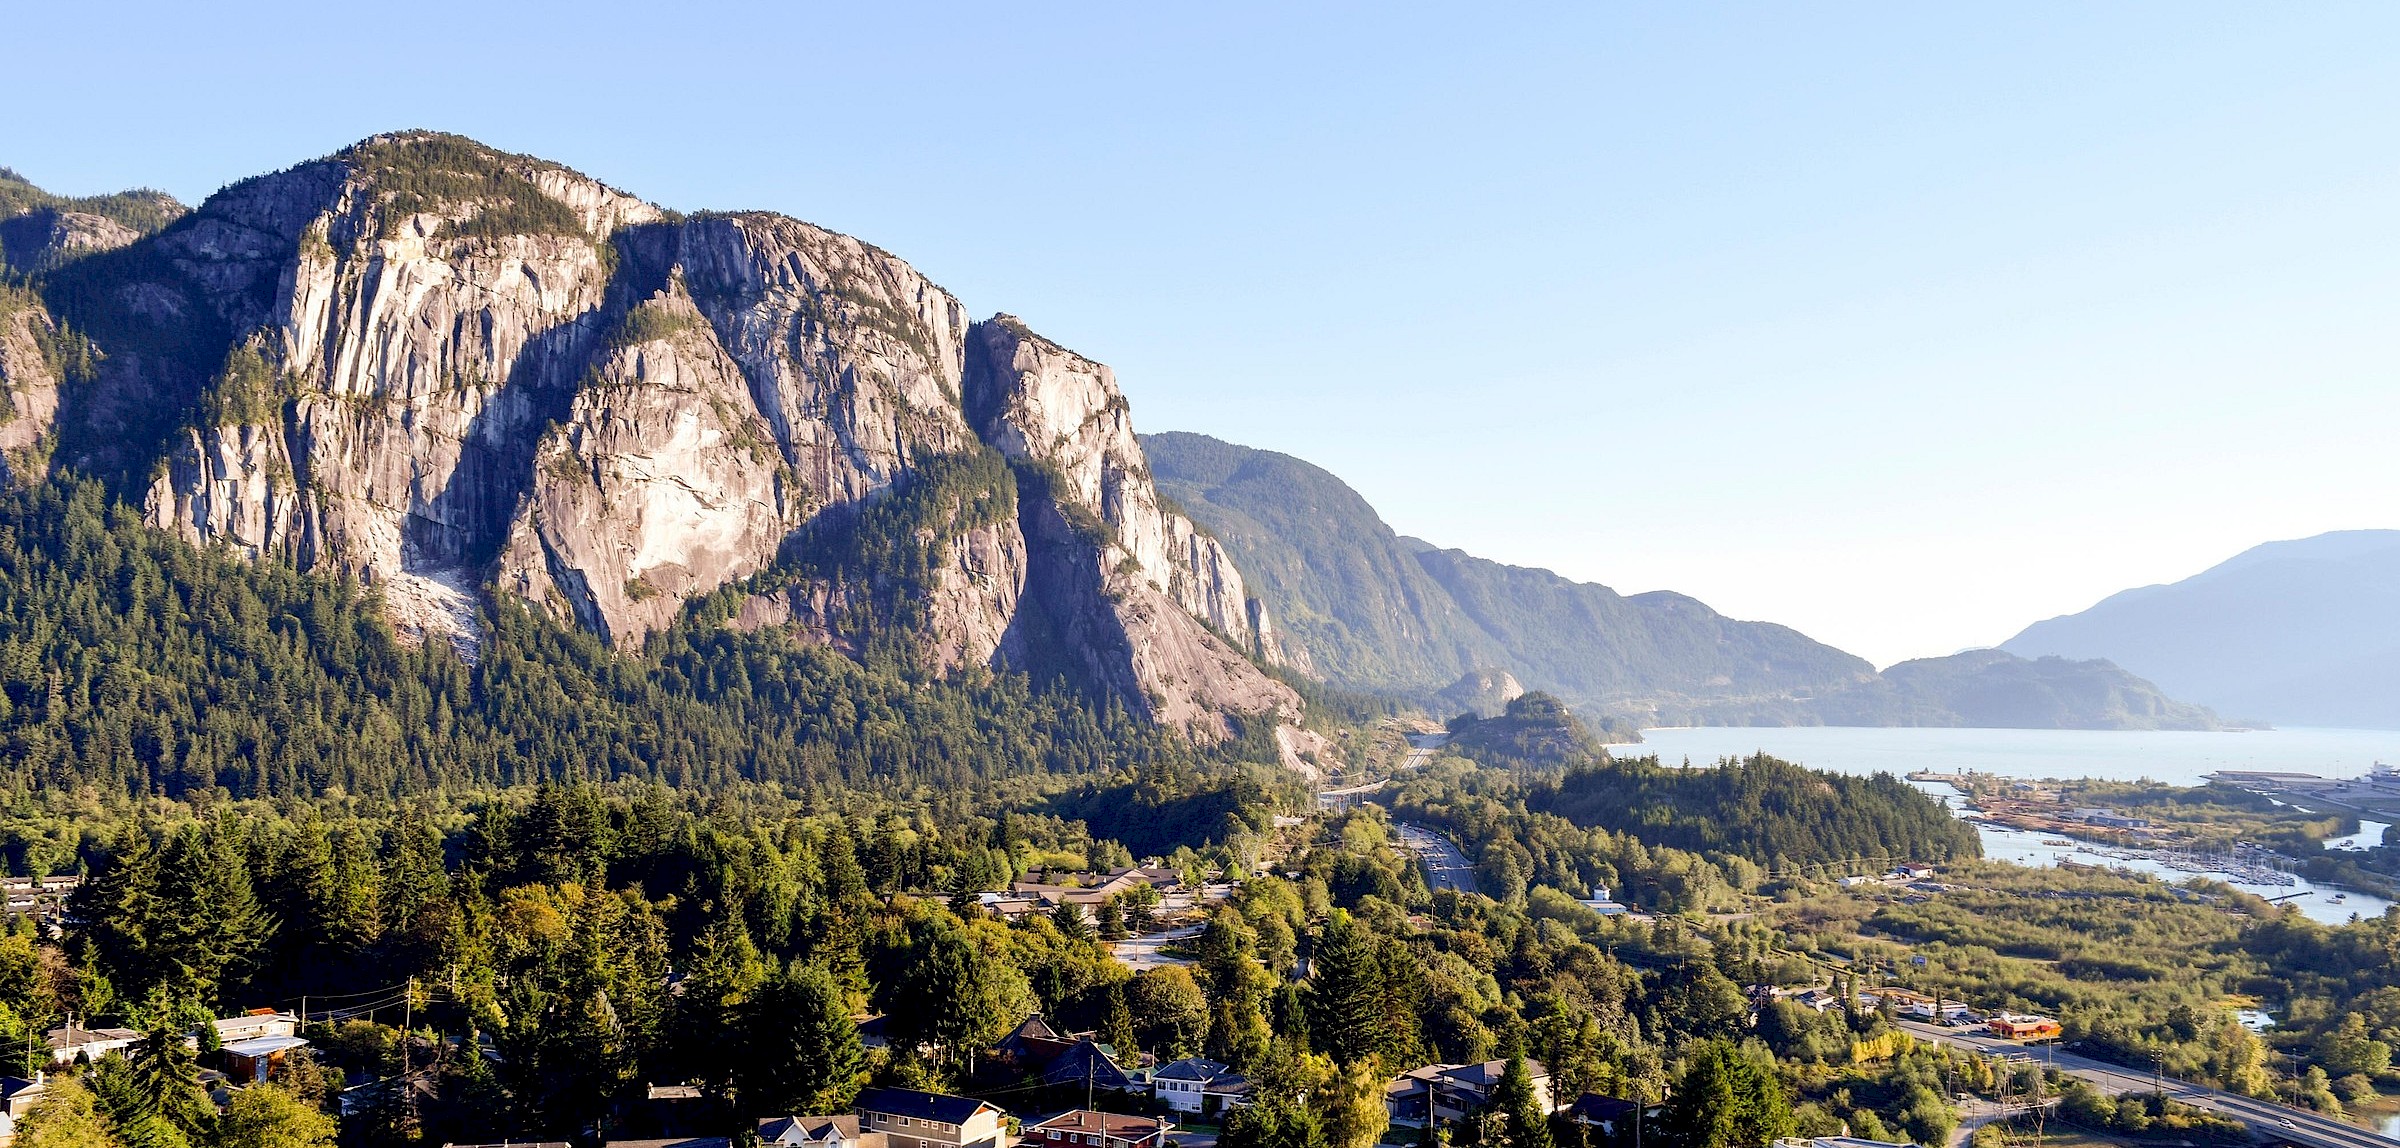 Town of Squamish with the backdrop of the Stawamus Chief